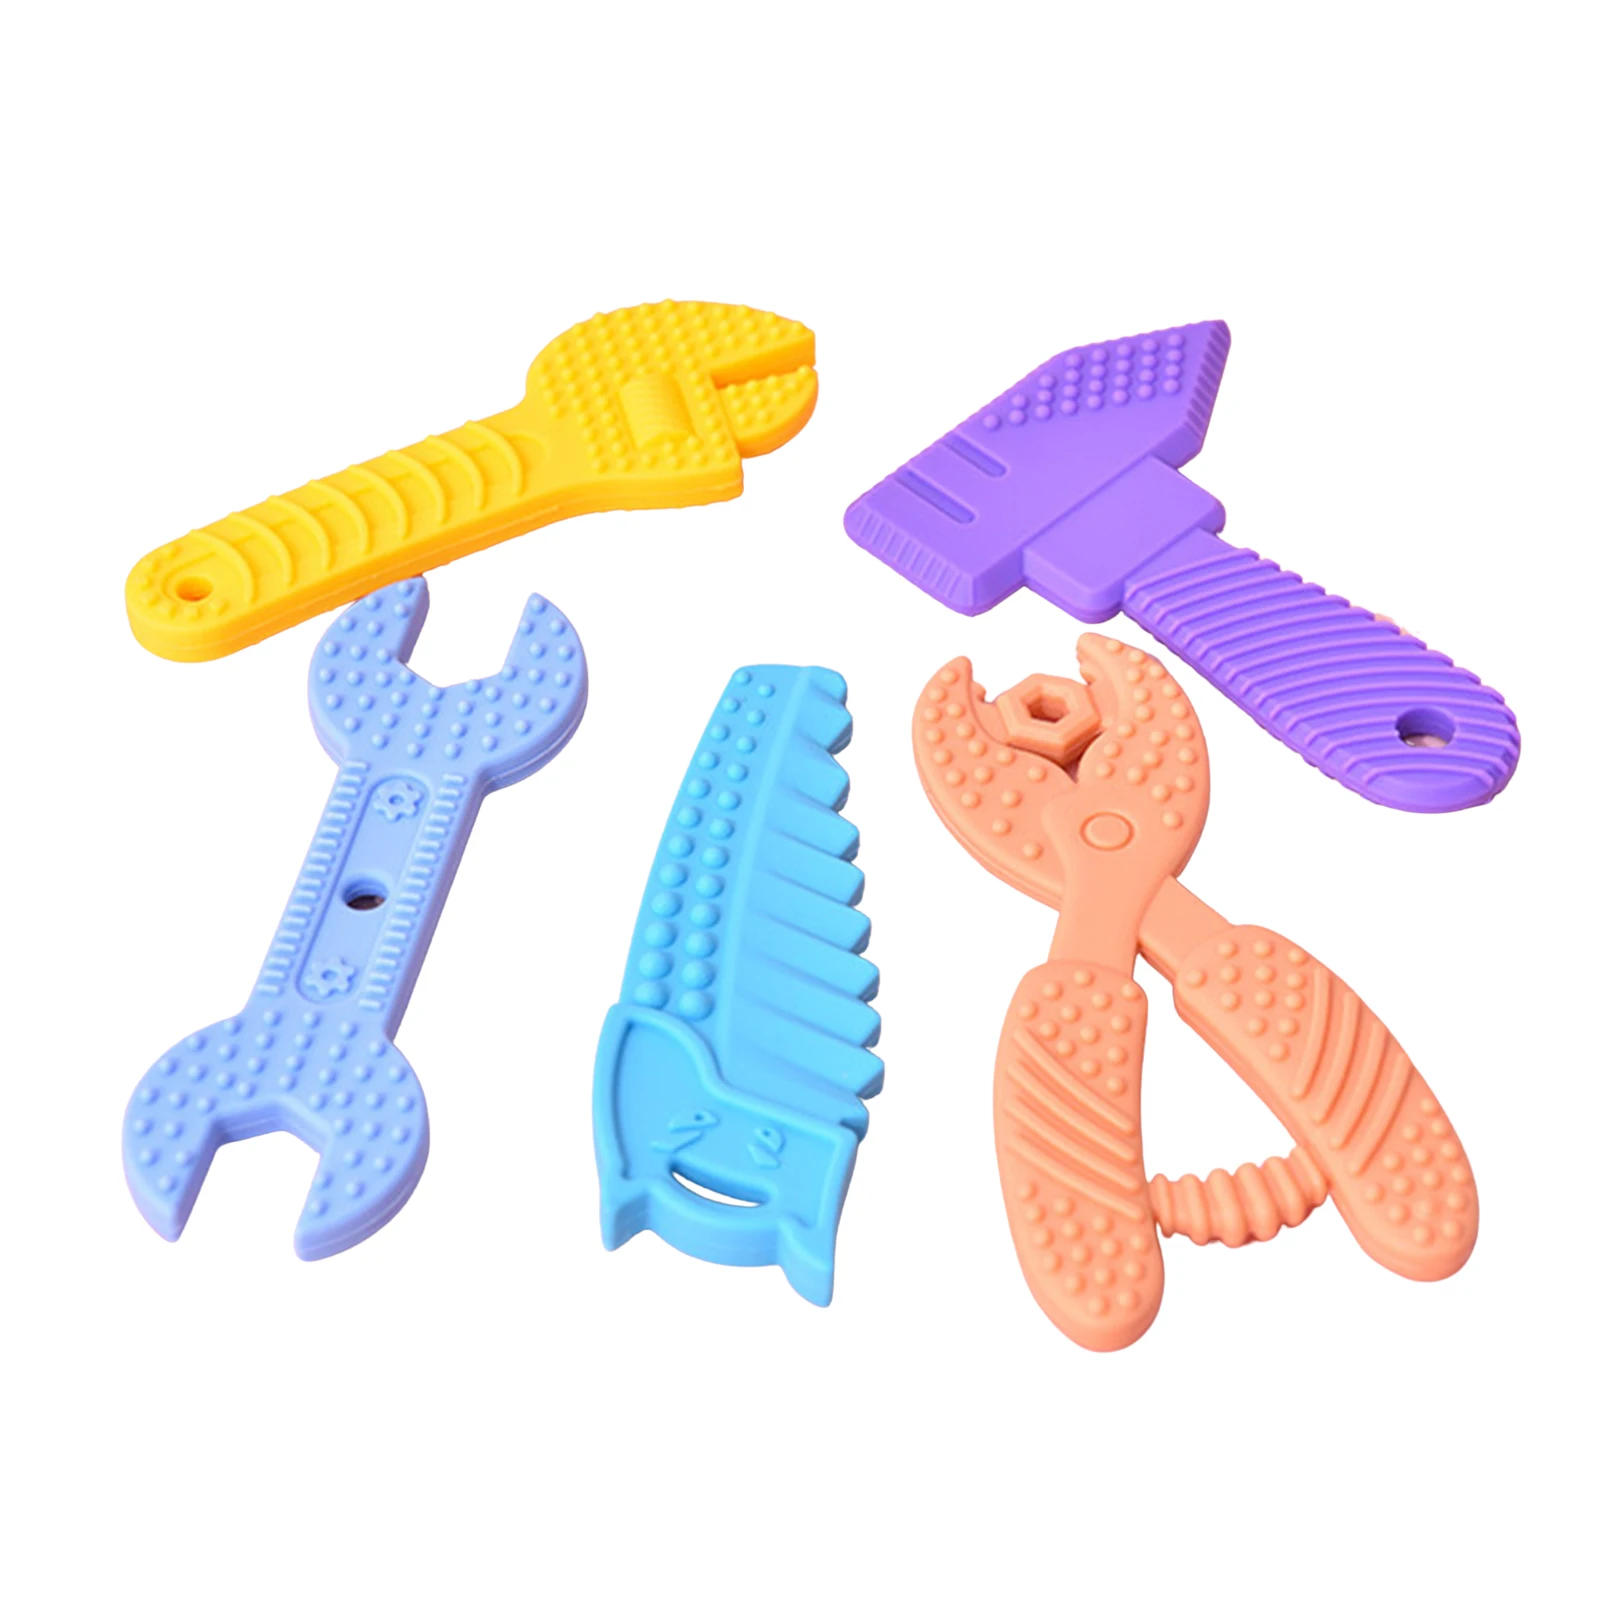 

5pcs Teething Toys Silicone Baby Teethers For Newborn Infants Toddlers Appease Pacifier Soothing Chew Molar Toy Gum Dental Care